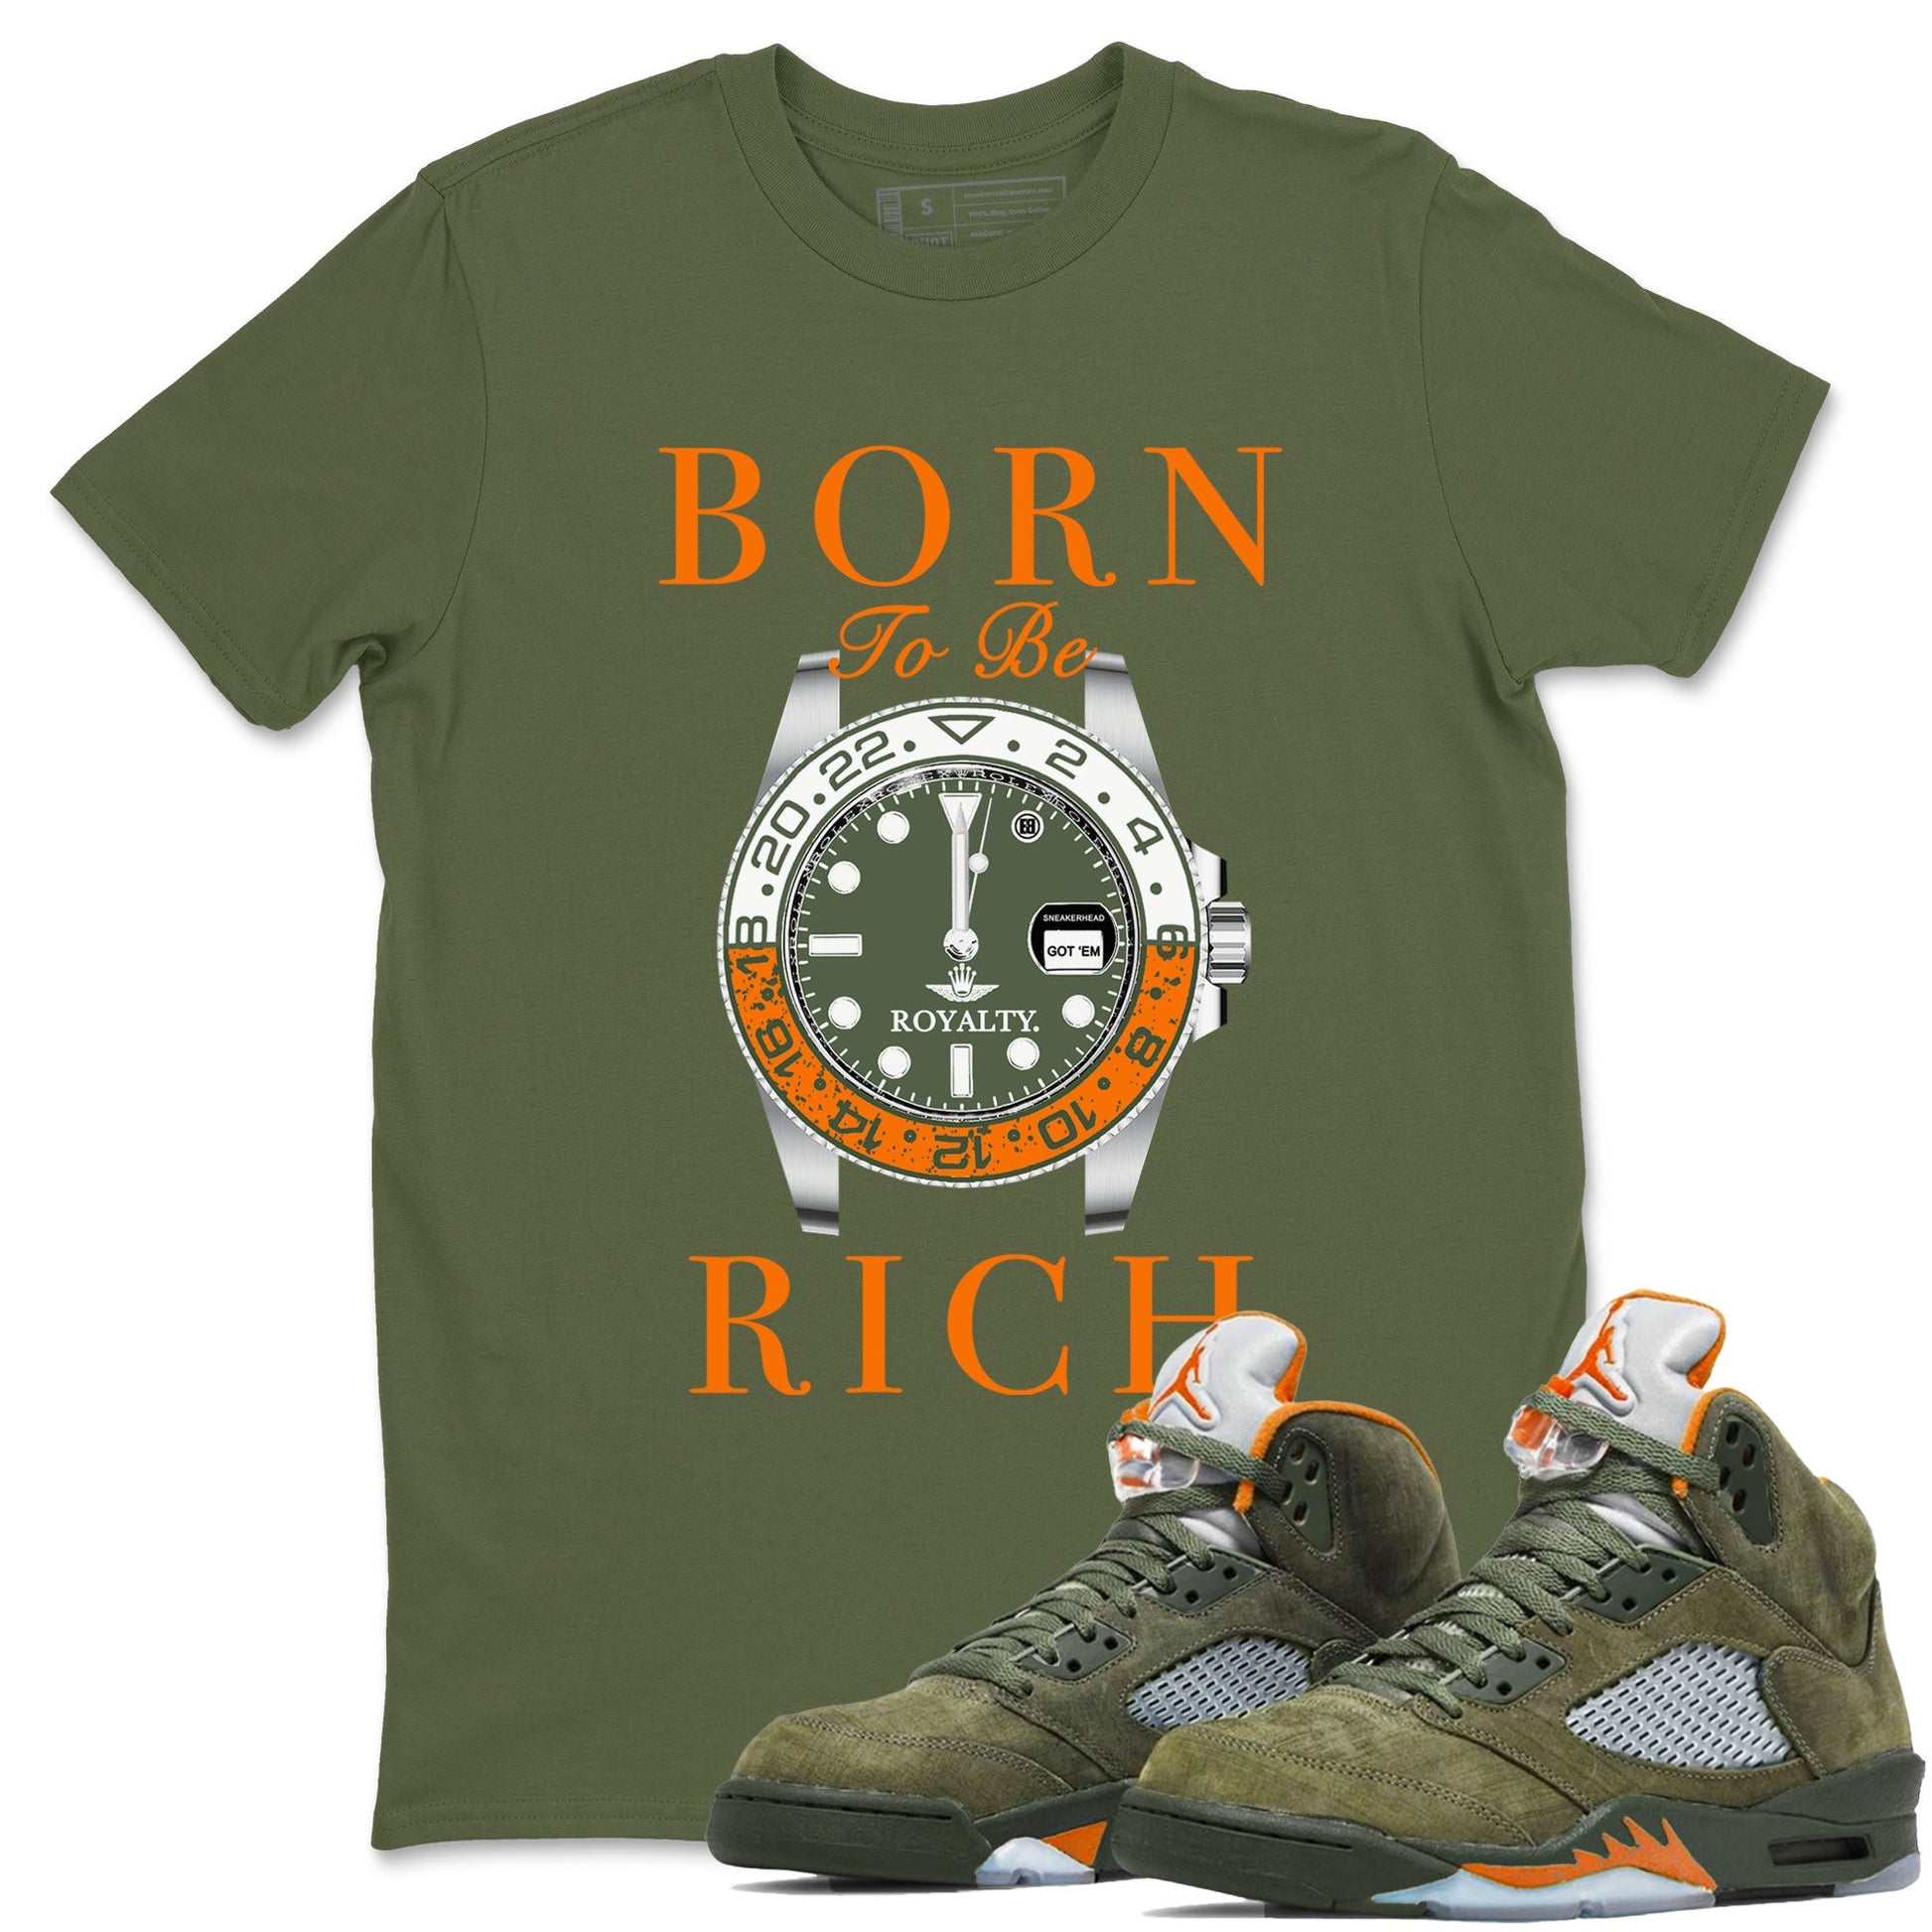 5s Olive shirt to match jordans Born To Be Rich sneaker tees Air Jordan 5 Retro Olive SNRT Sneaker Release Tees unisex cotton Military Green 1 crew neck shirt